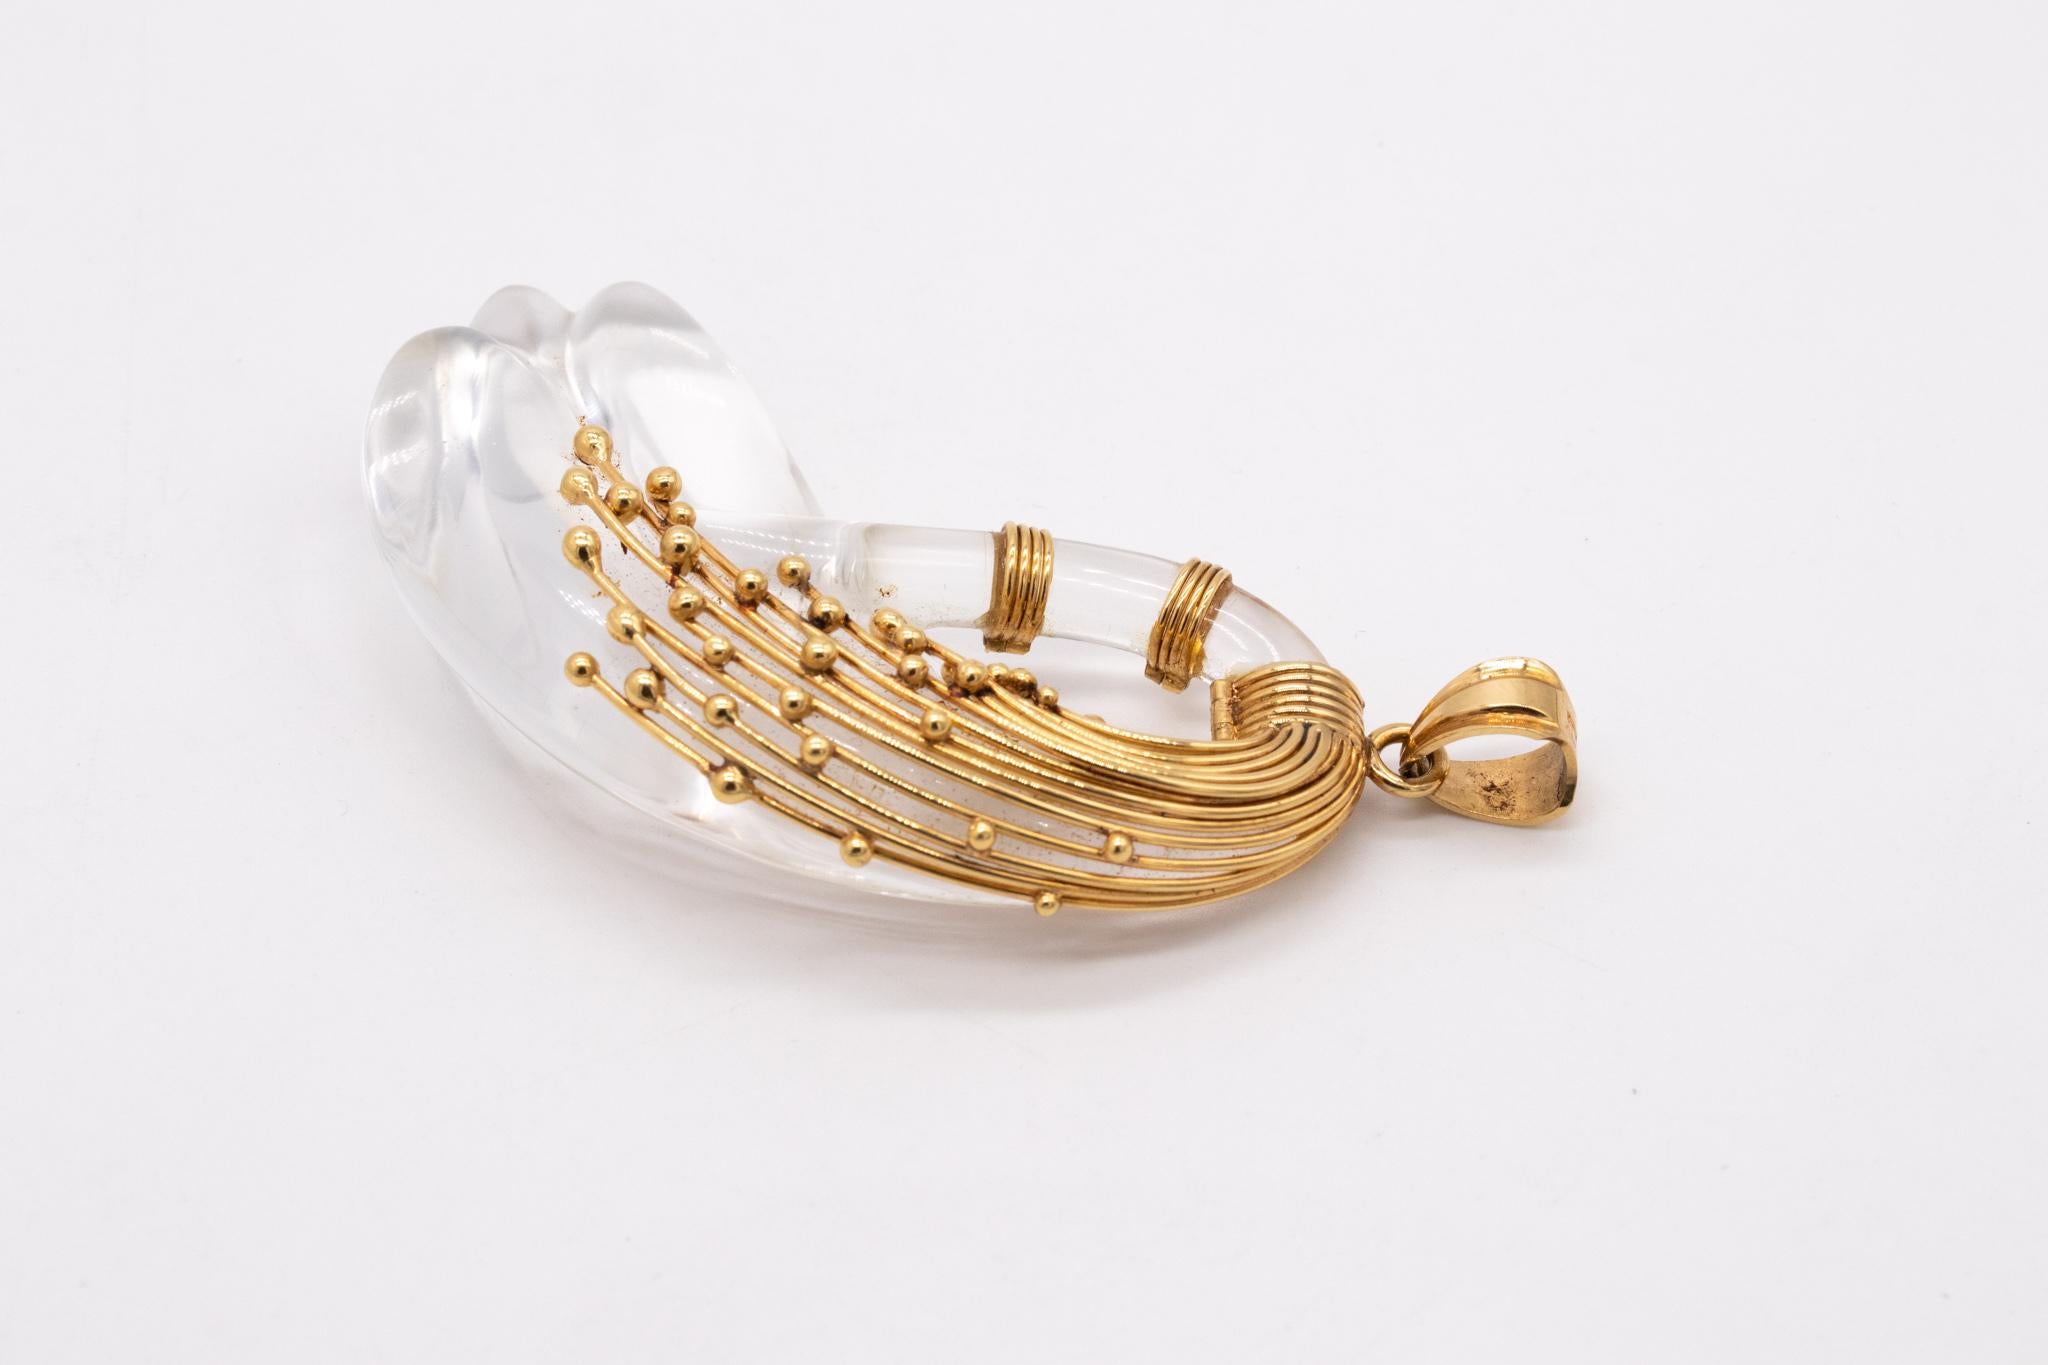 Mixed Cut Sculptural Abstraction of Swan Pendant 18Kt Yellow Gold with Carved Rock Crystal